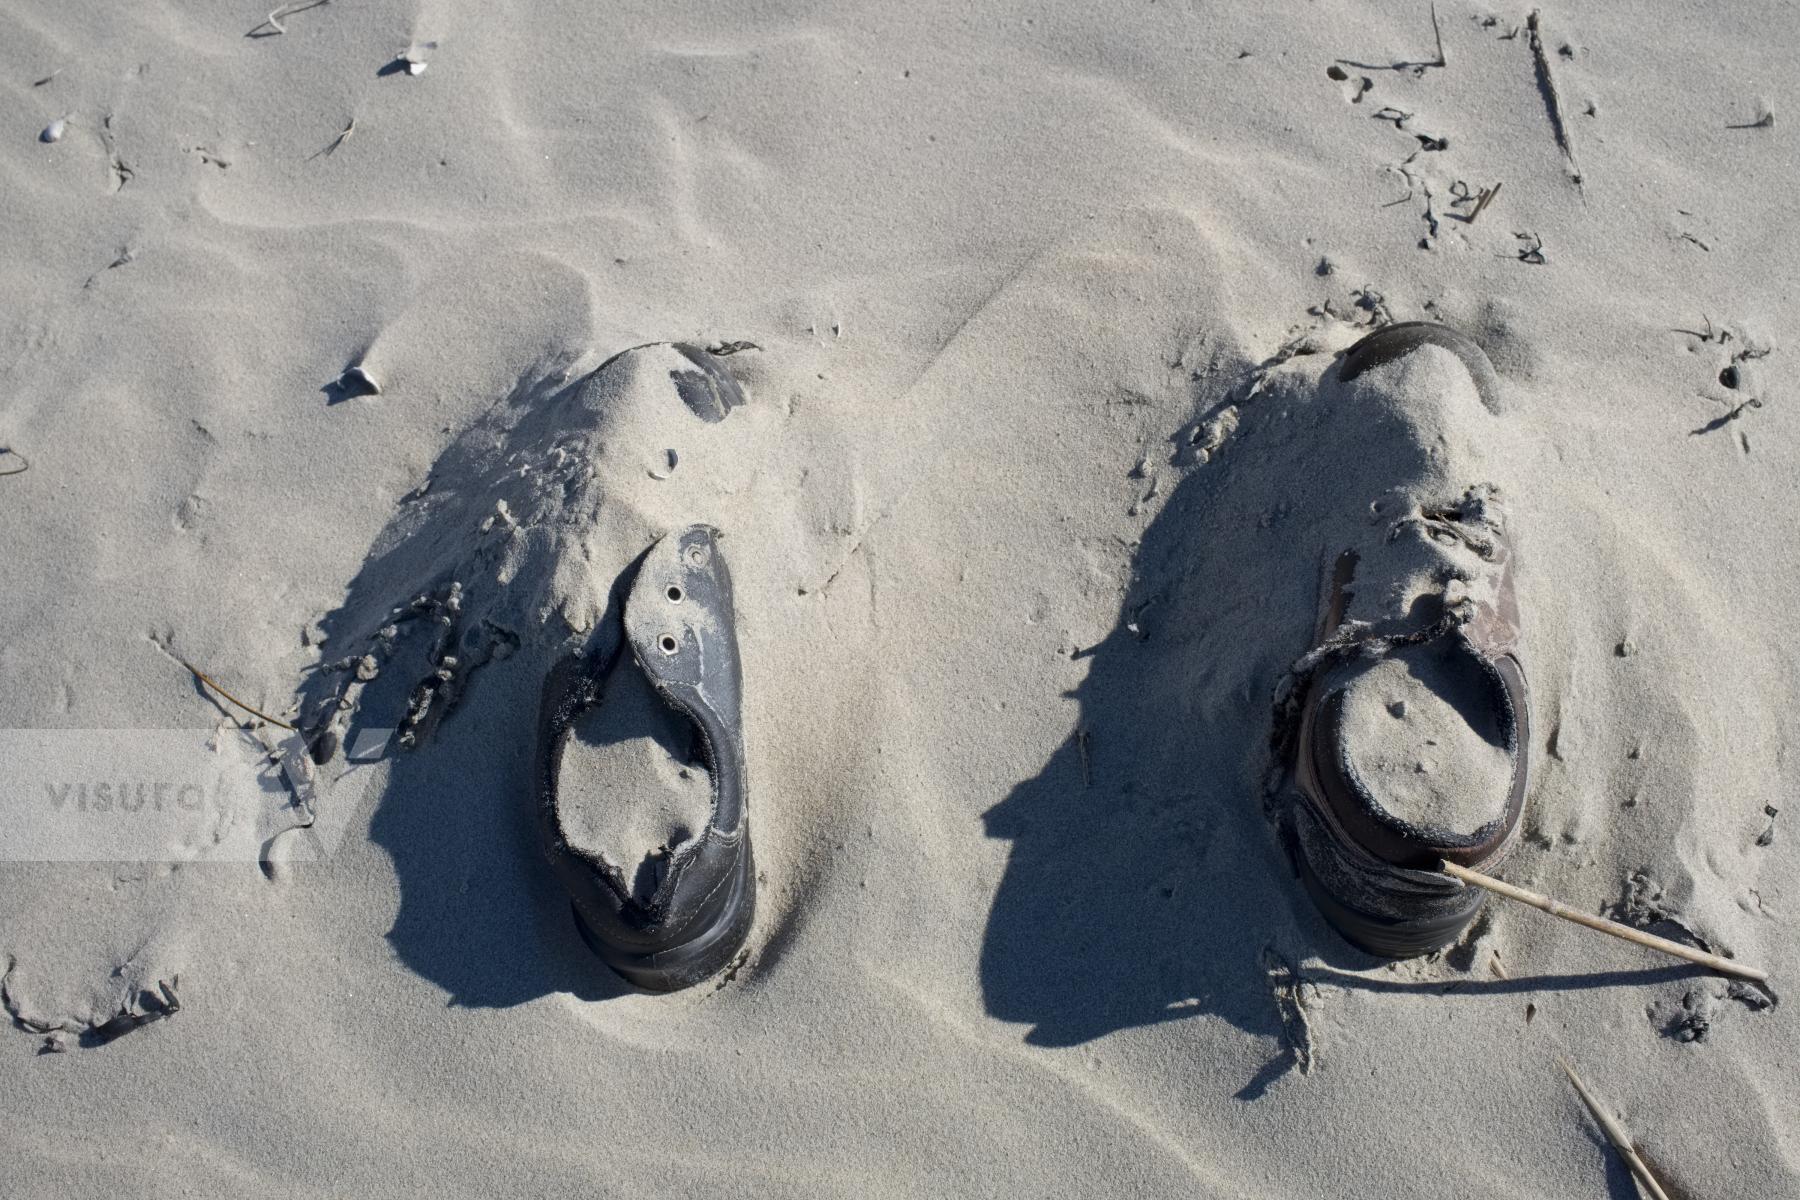 Purchase Shoes Washed Ashore by Ellen Kok